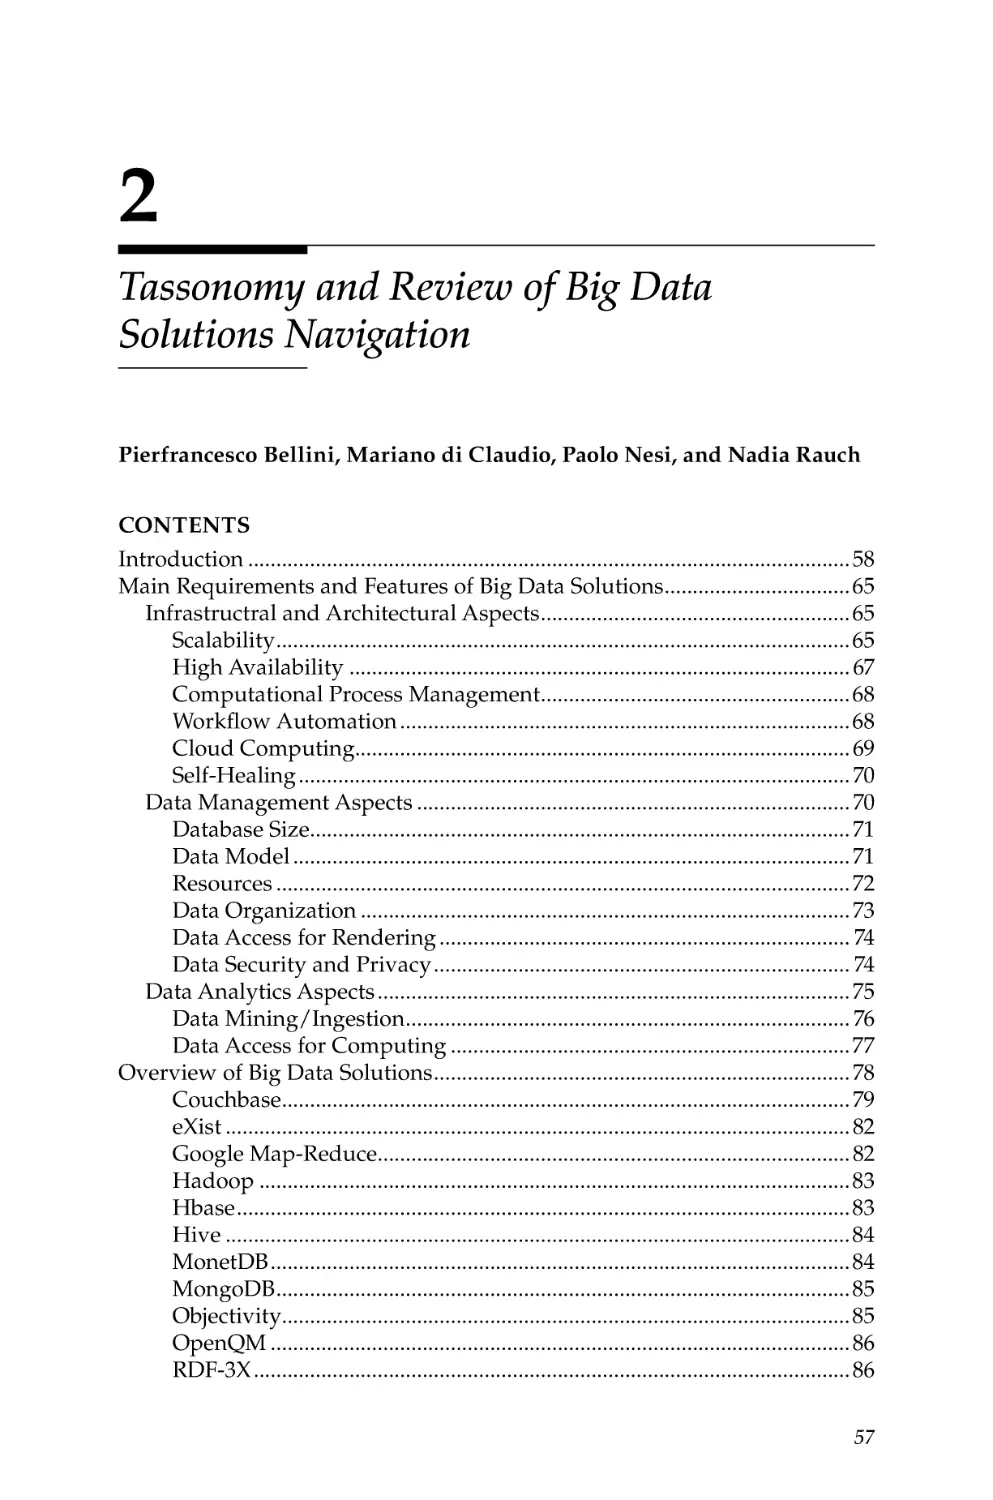 2. Tassonomy and Review of Big Data Solutions Navigation